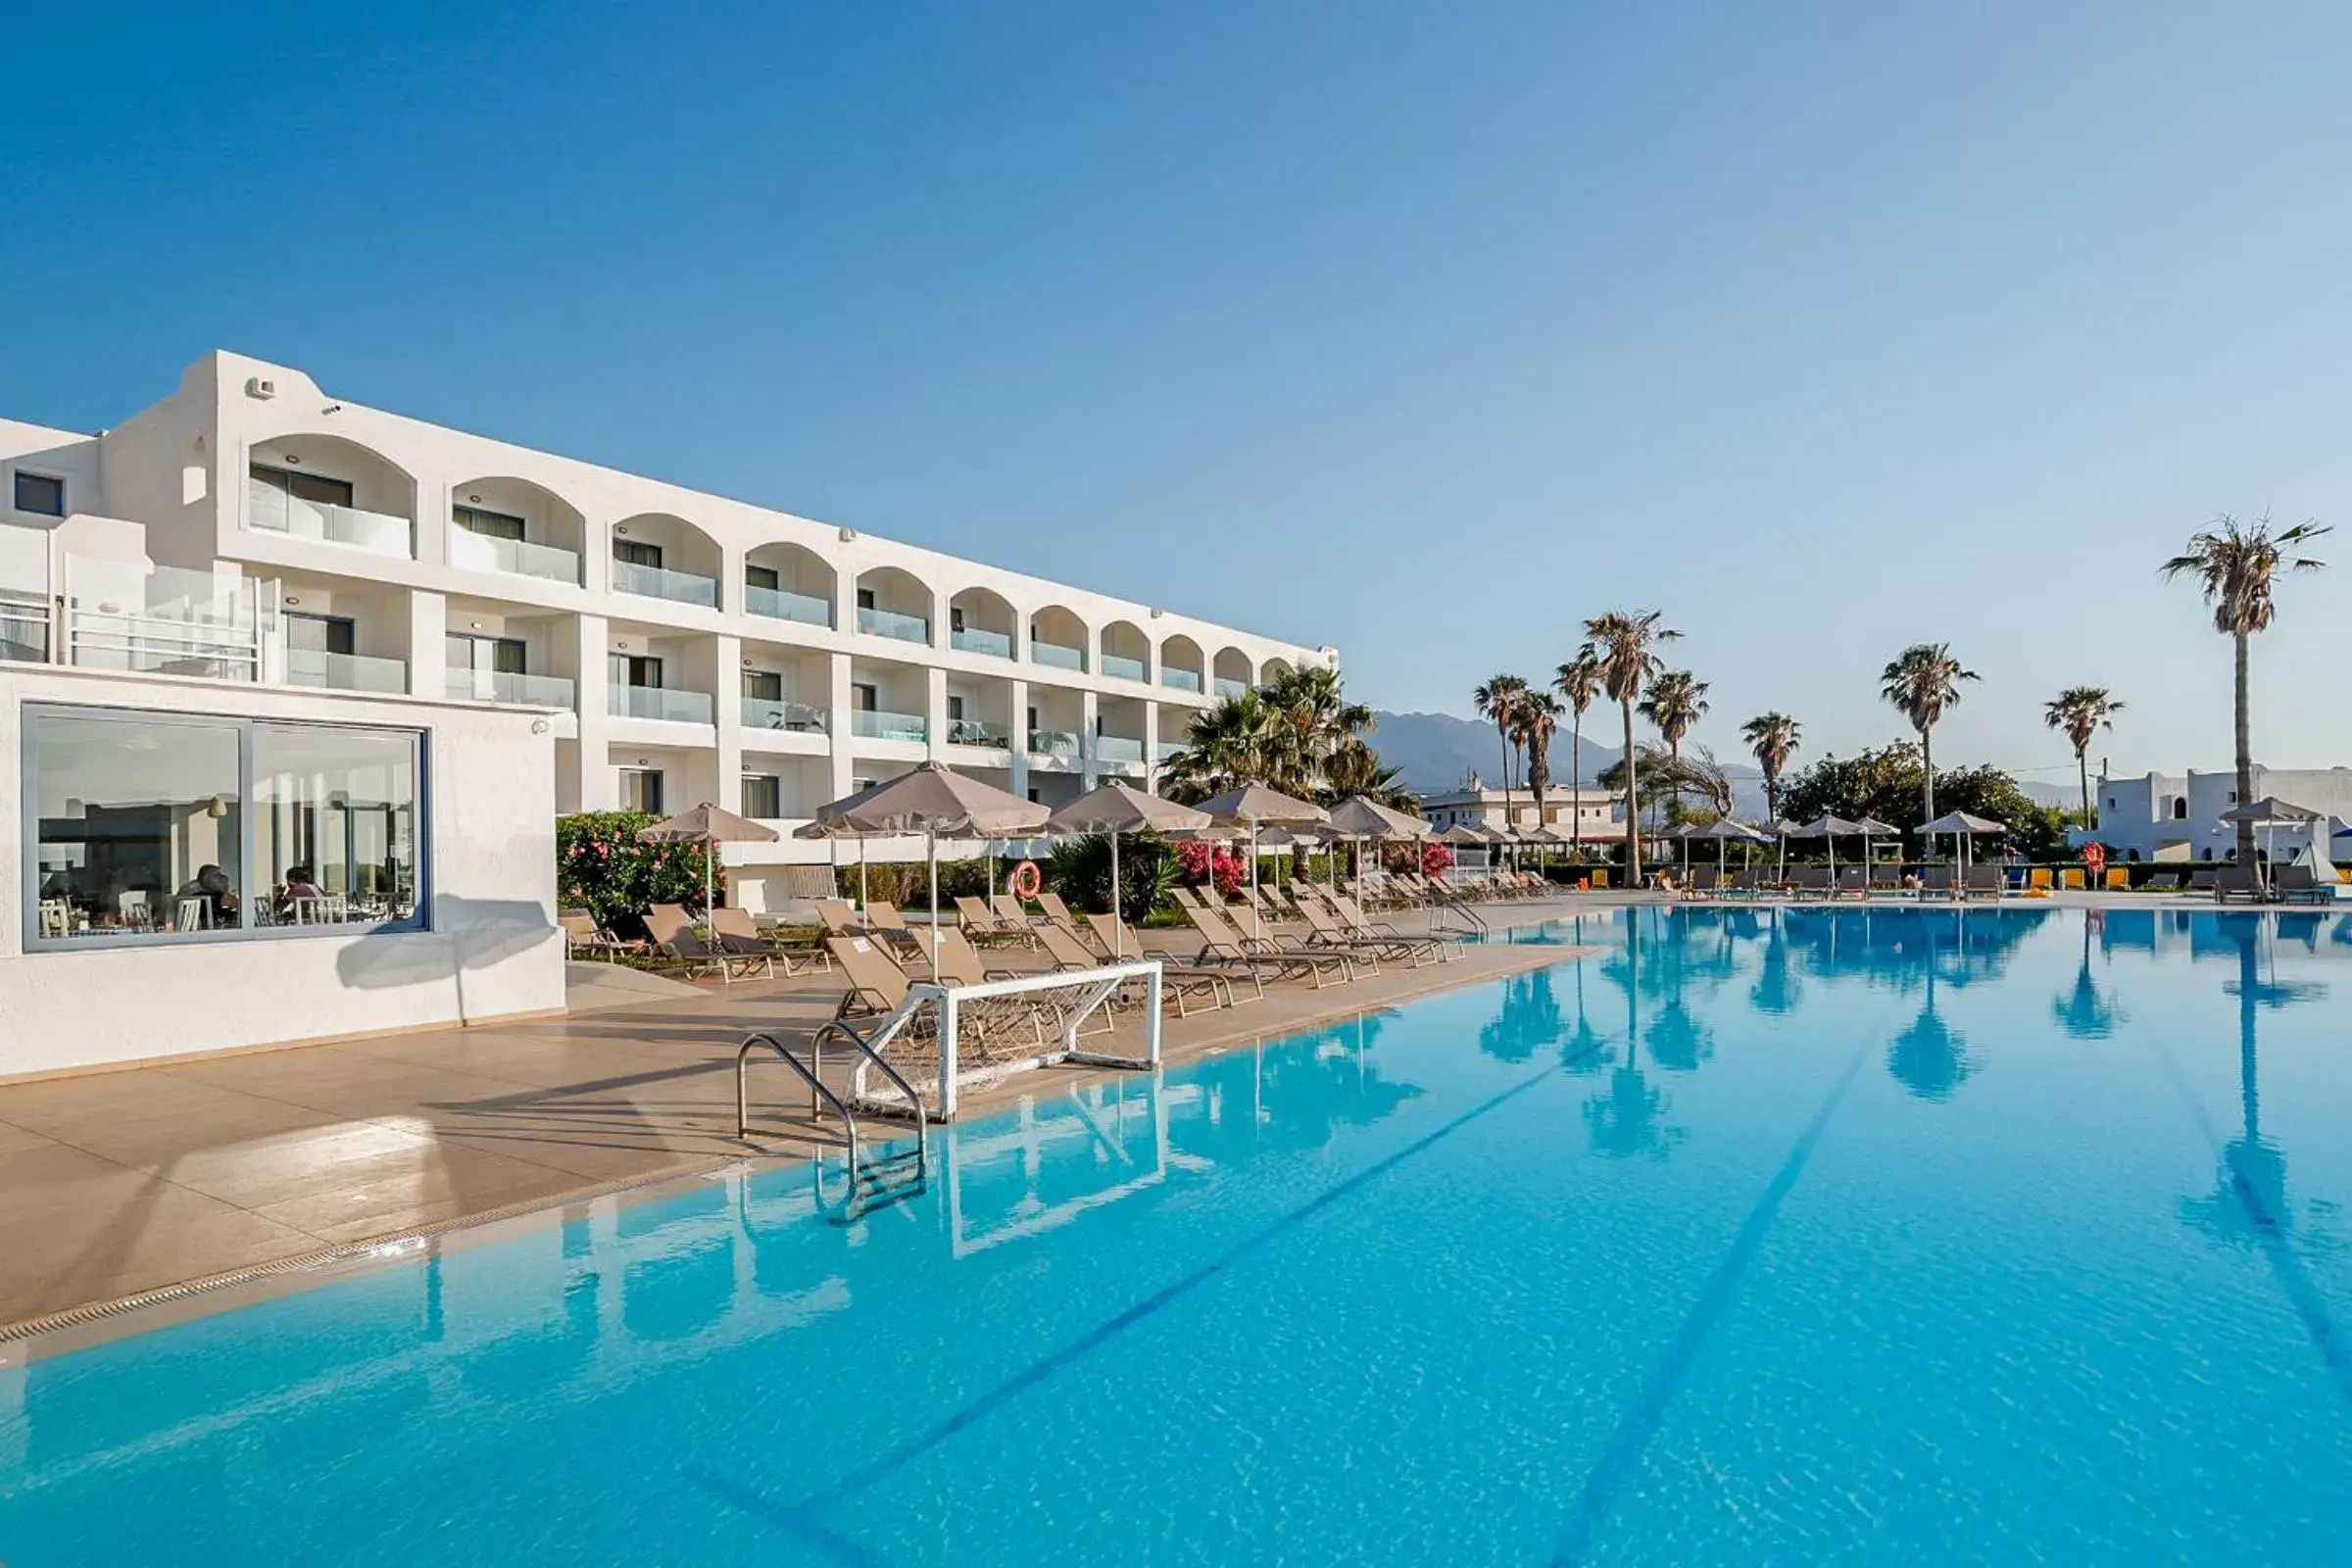 Property building, Swimming Pool in The Aeolos Beach Hotel